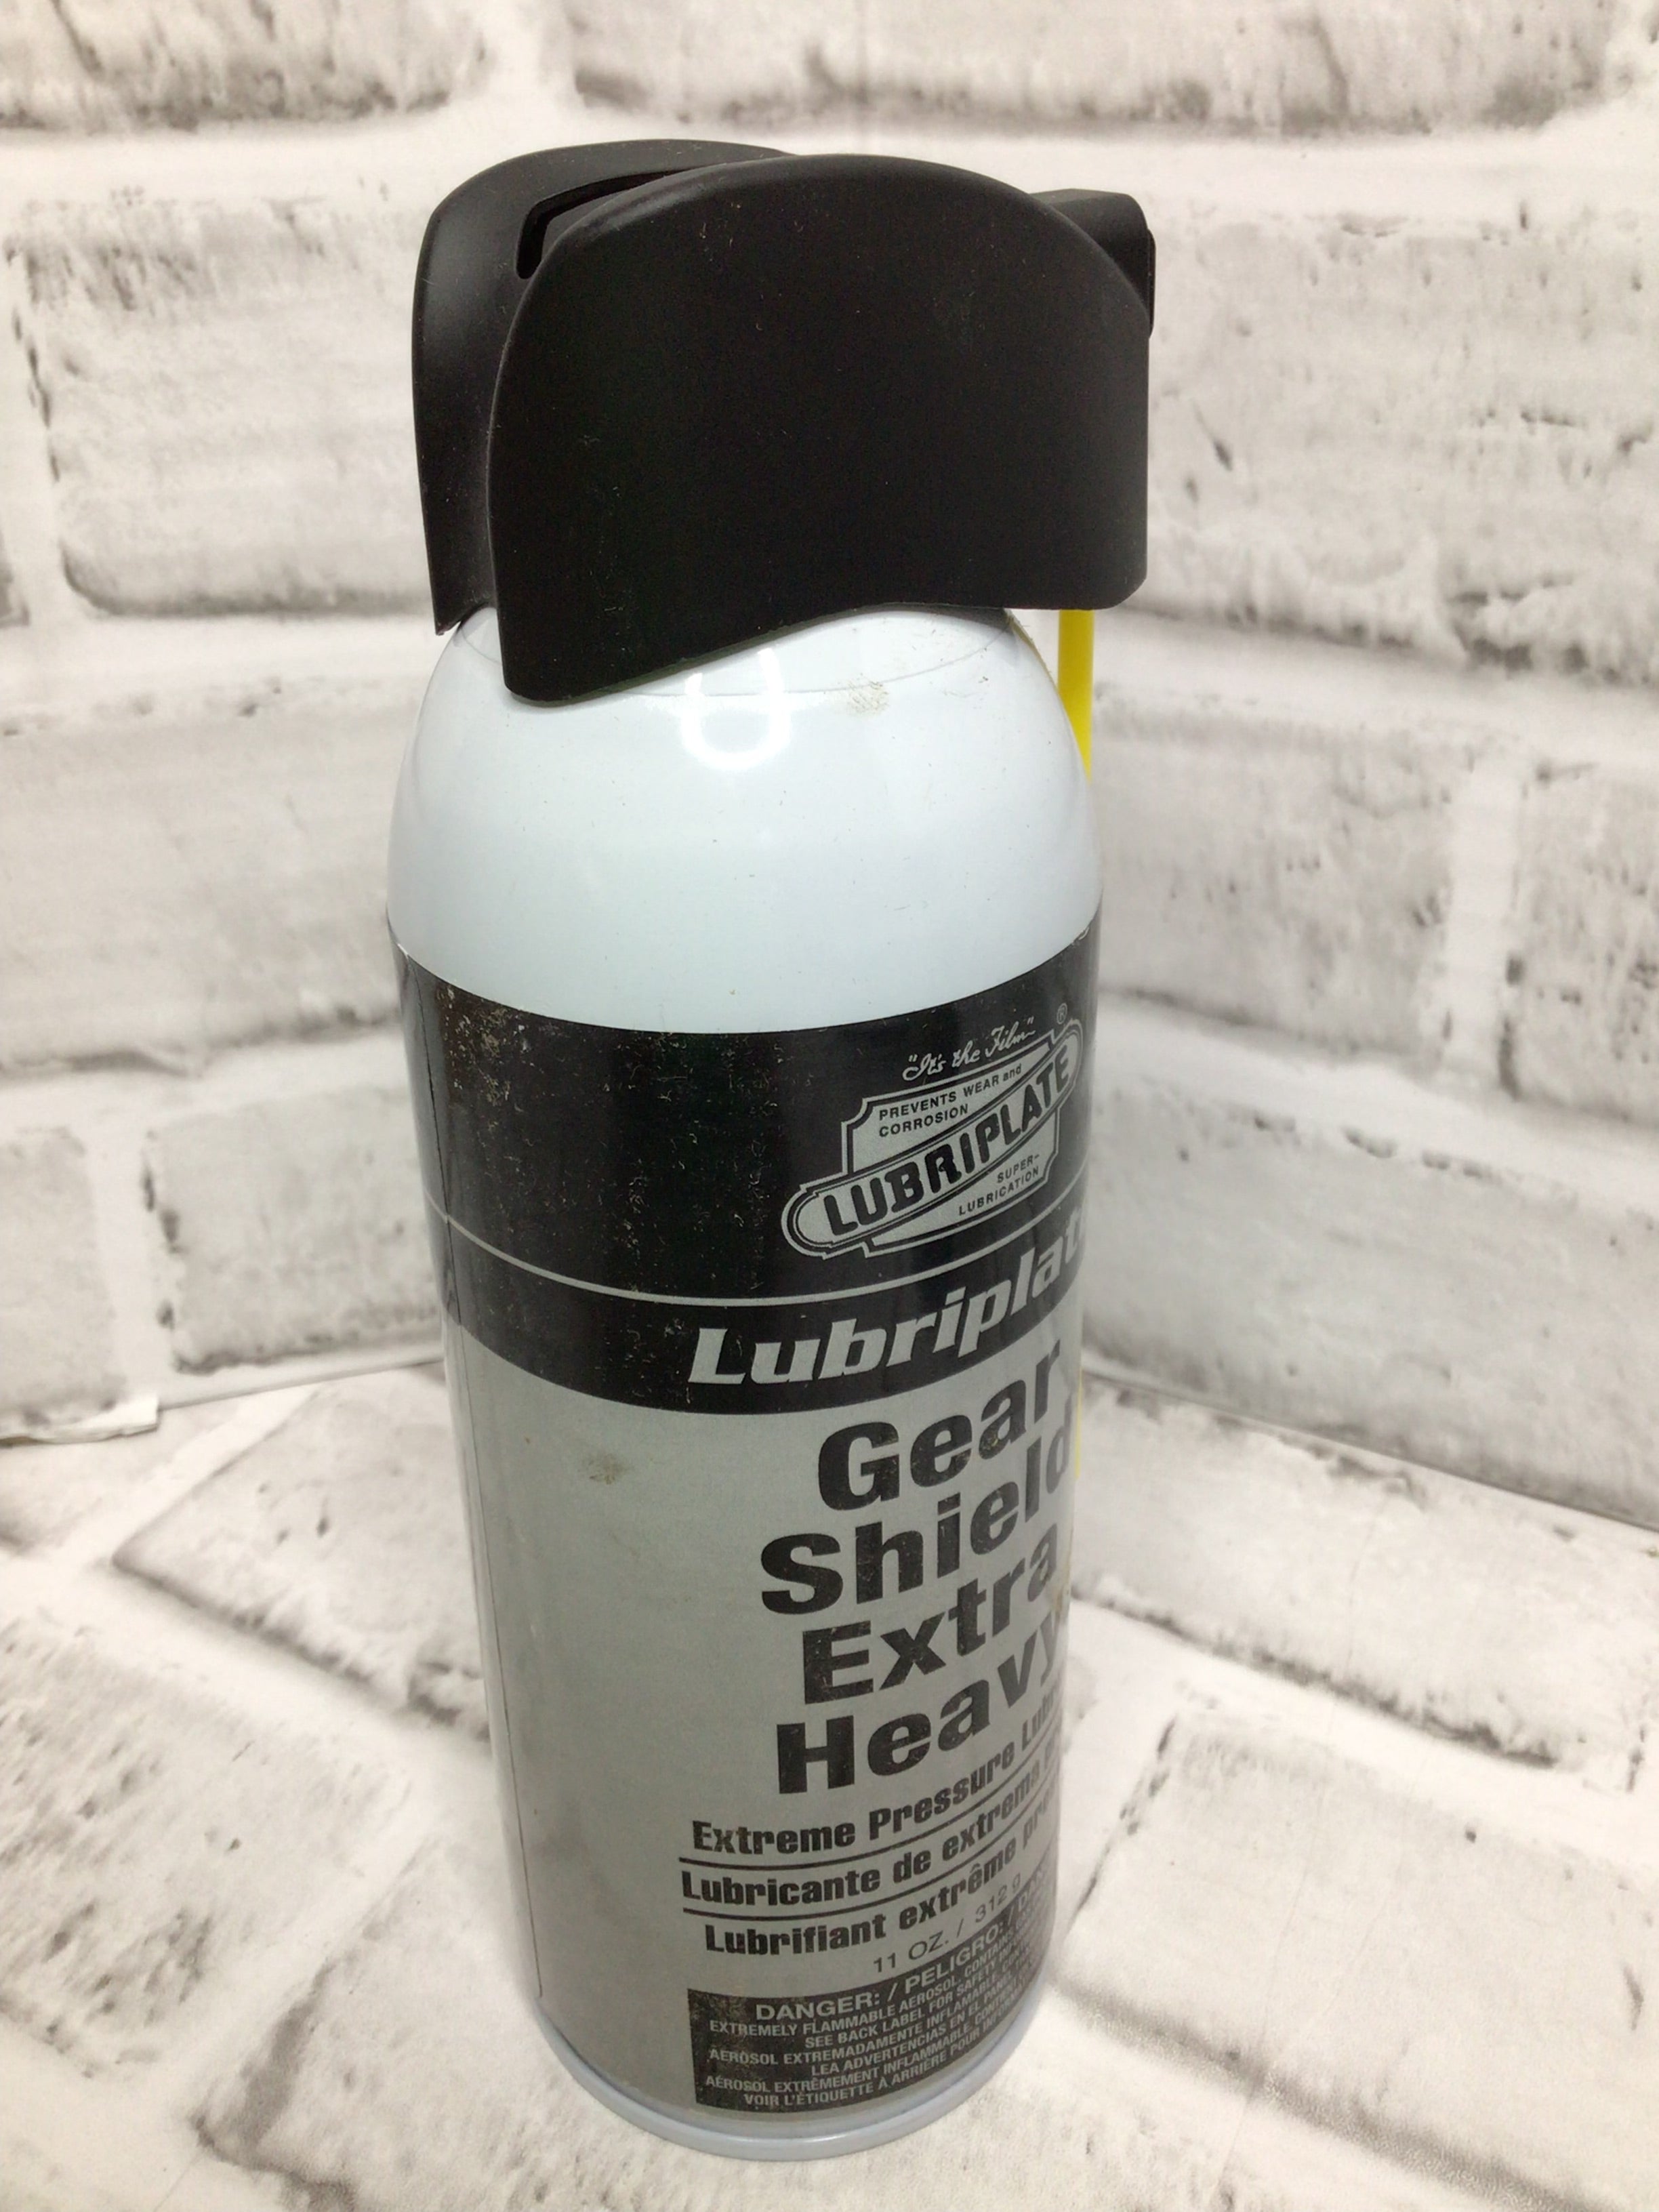 Lubriplate Gear Shield Extra Heavy Lithium Lubricant Grease L0152-063 (10 CANS) (8169884909806)